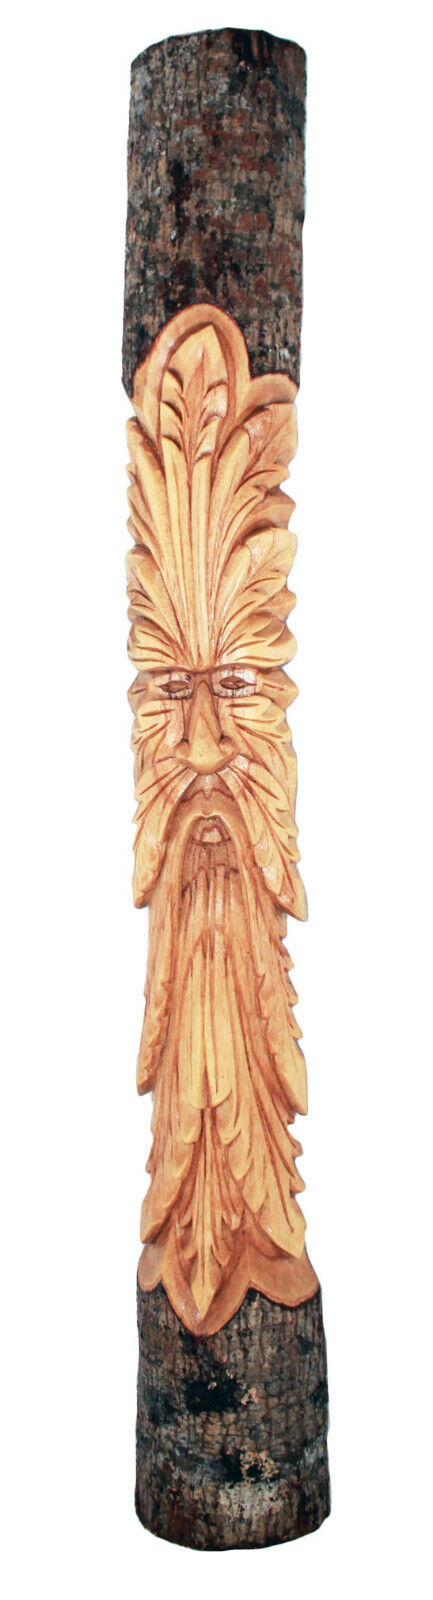 Hand Carved Wooden Green Man Half tree stump 100 cm CARVING for inside/ outside